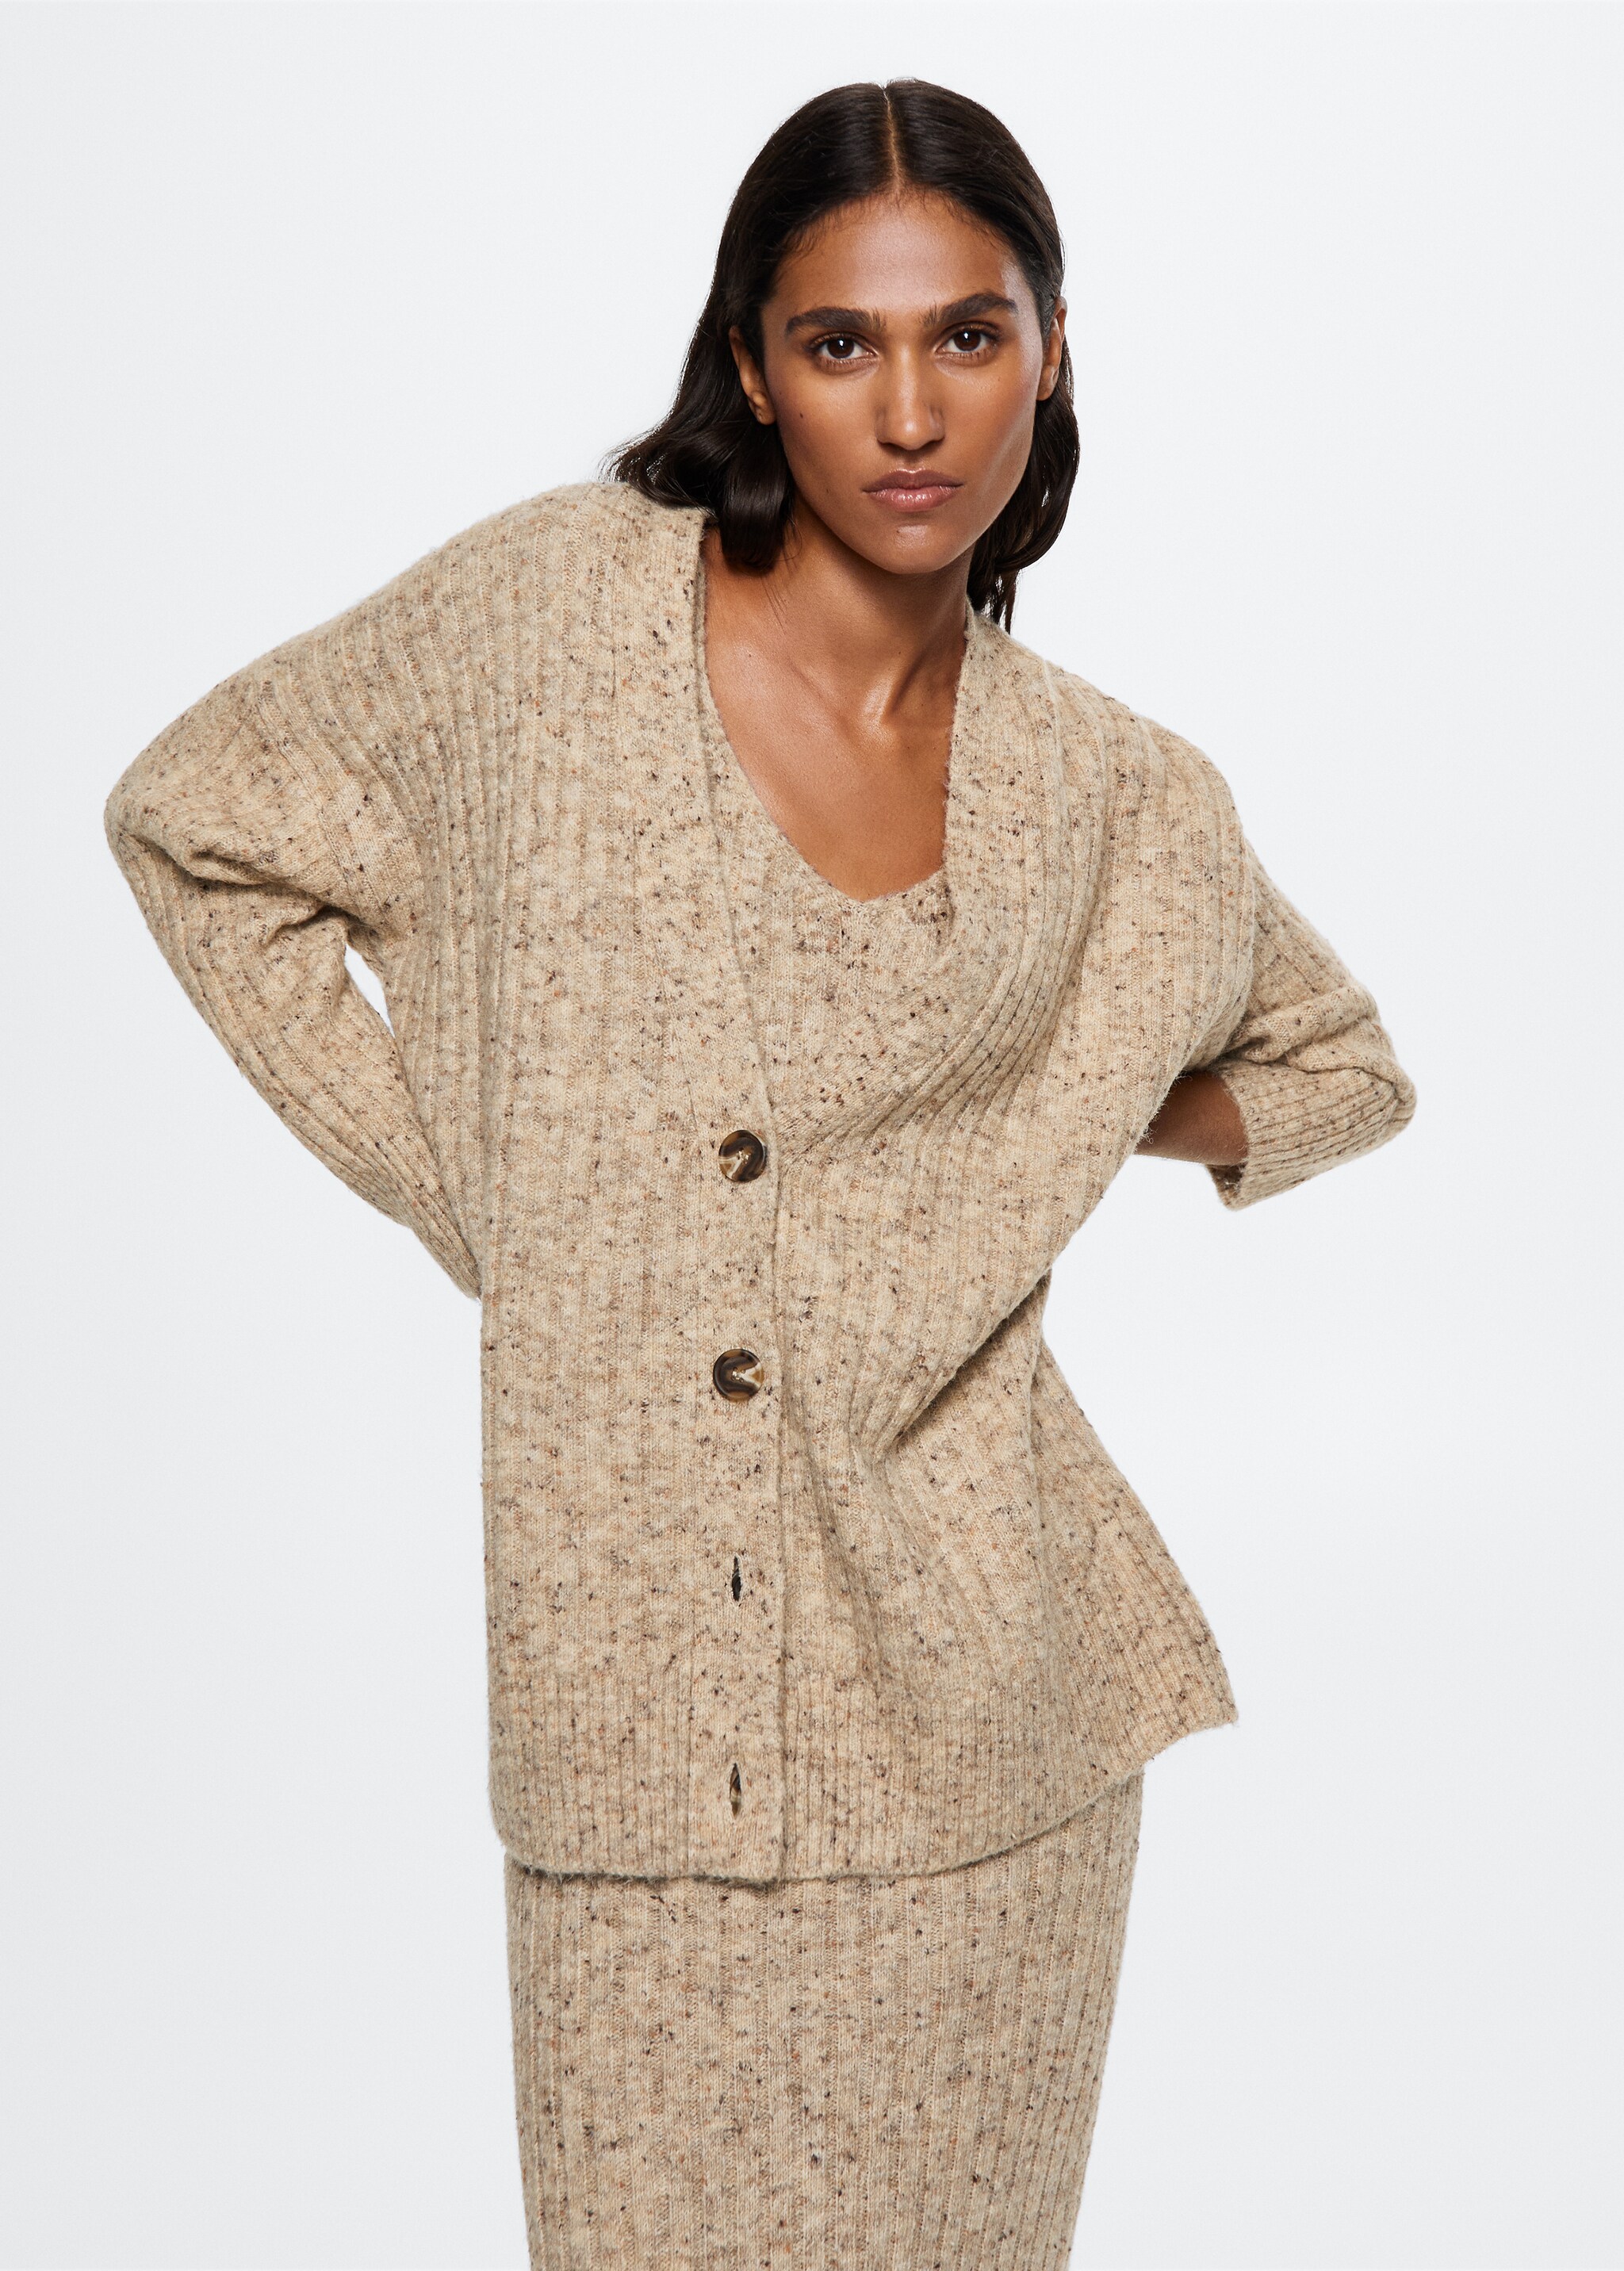 Marbled ribbed knitted cardigan - Medium plane